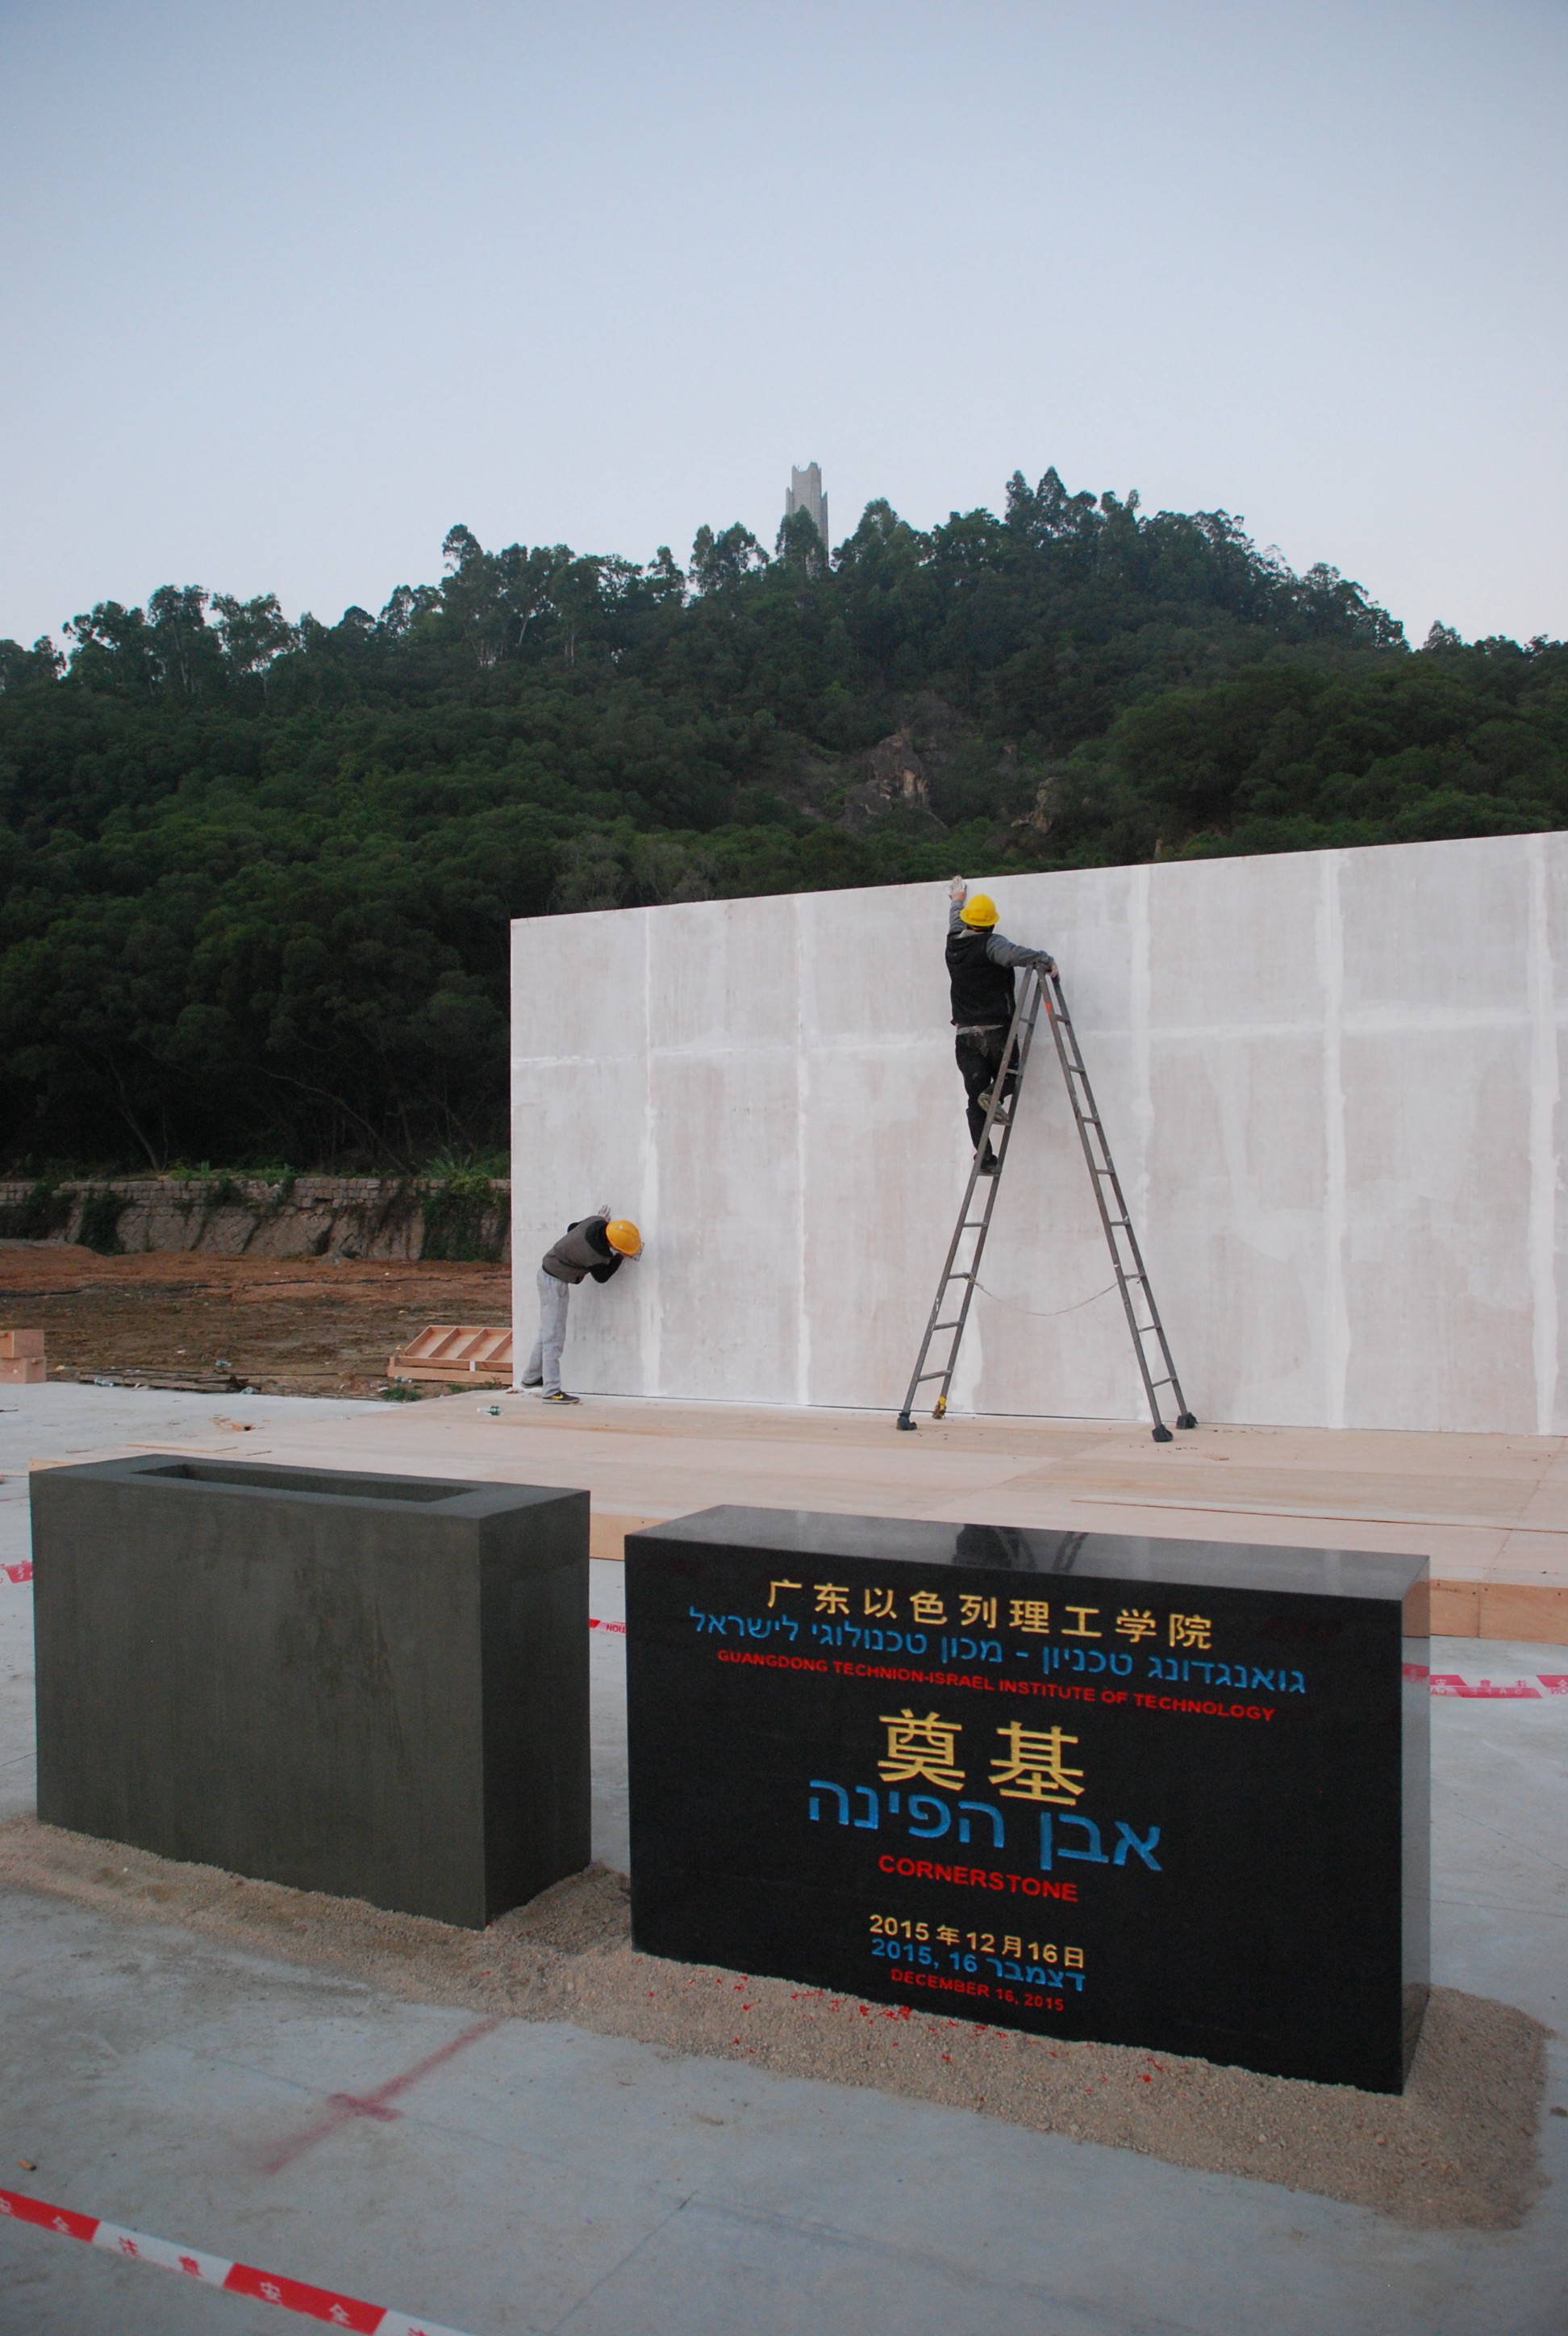 Workers prepare the setting for Wednesday’s cornerstone-laying ceremony. The cornerstone is written in Chinese, Hebrew, and English. Photo: John Noonan